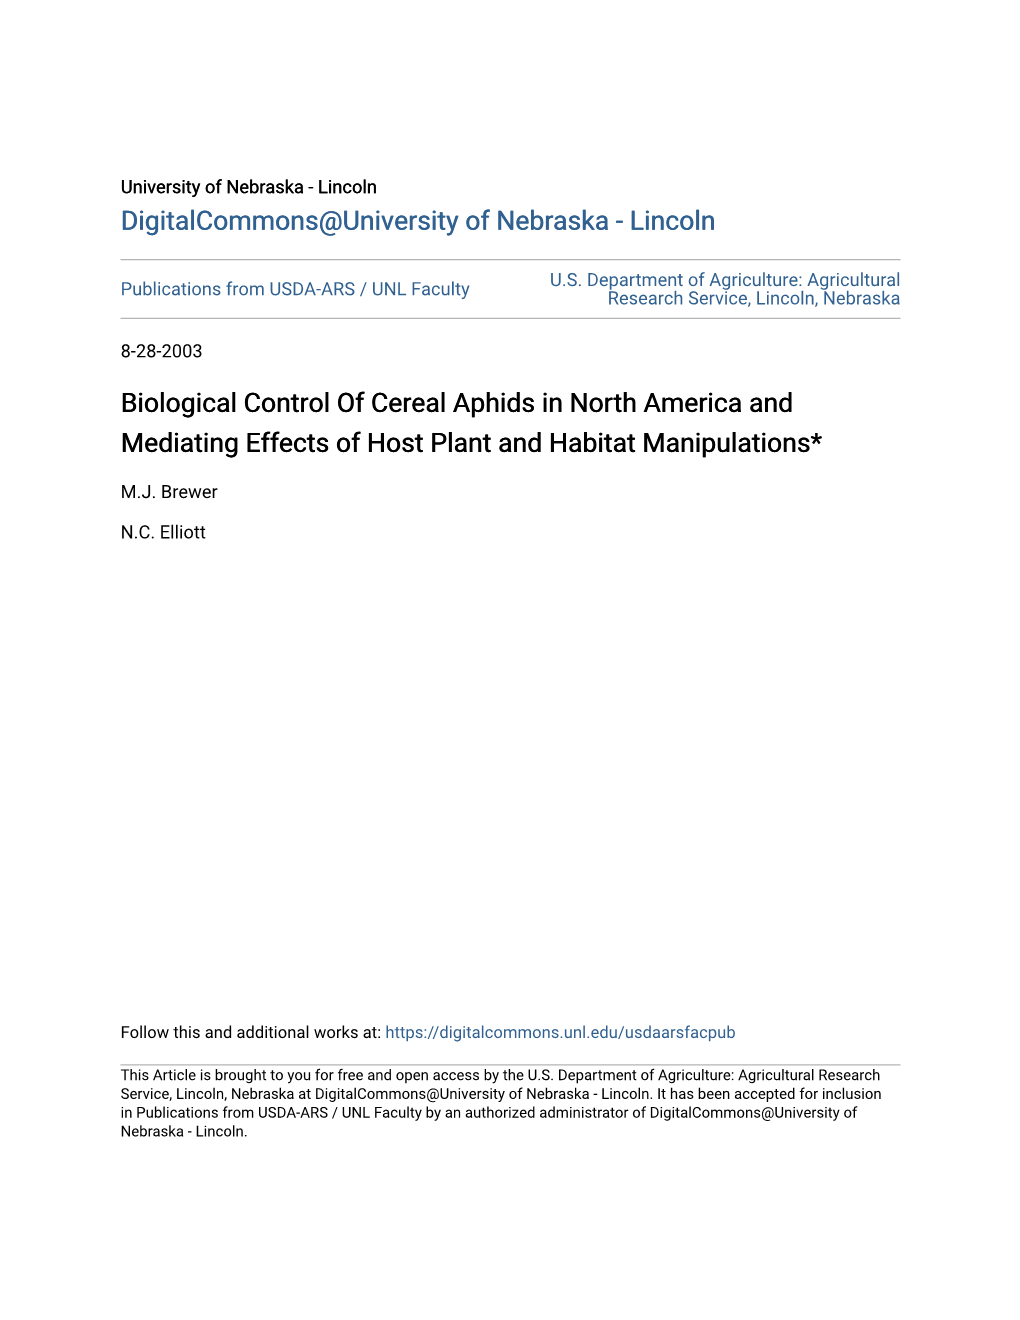 Biological Control of Cereal Aphids in North America and Mediating Effects of Host Plant and Habitat Manipulations*